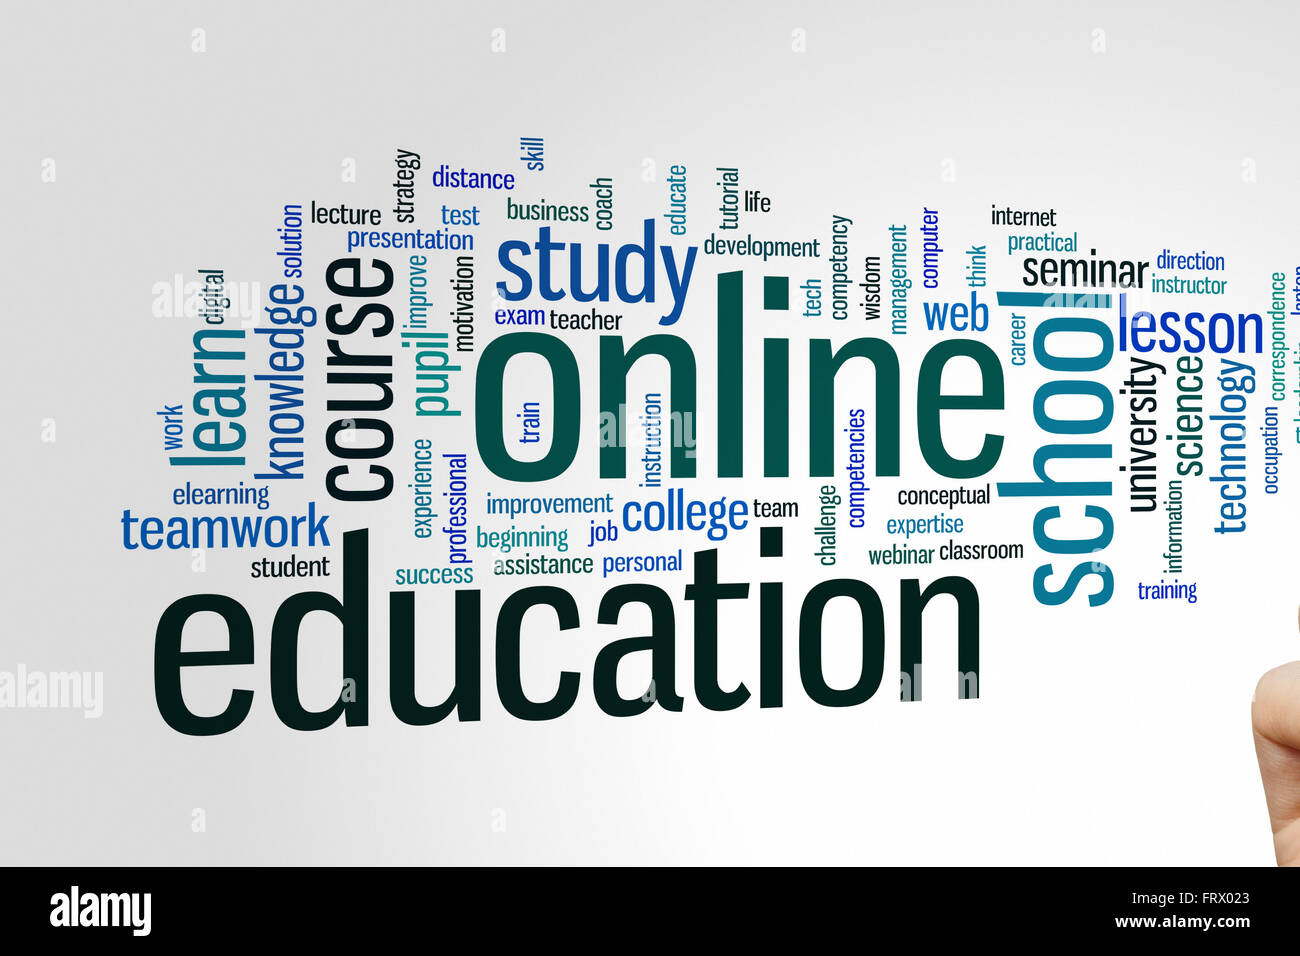 Online Education Concept Word Cloud Background Stock Photo Alamy